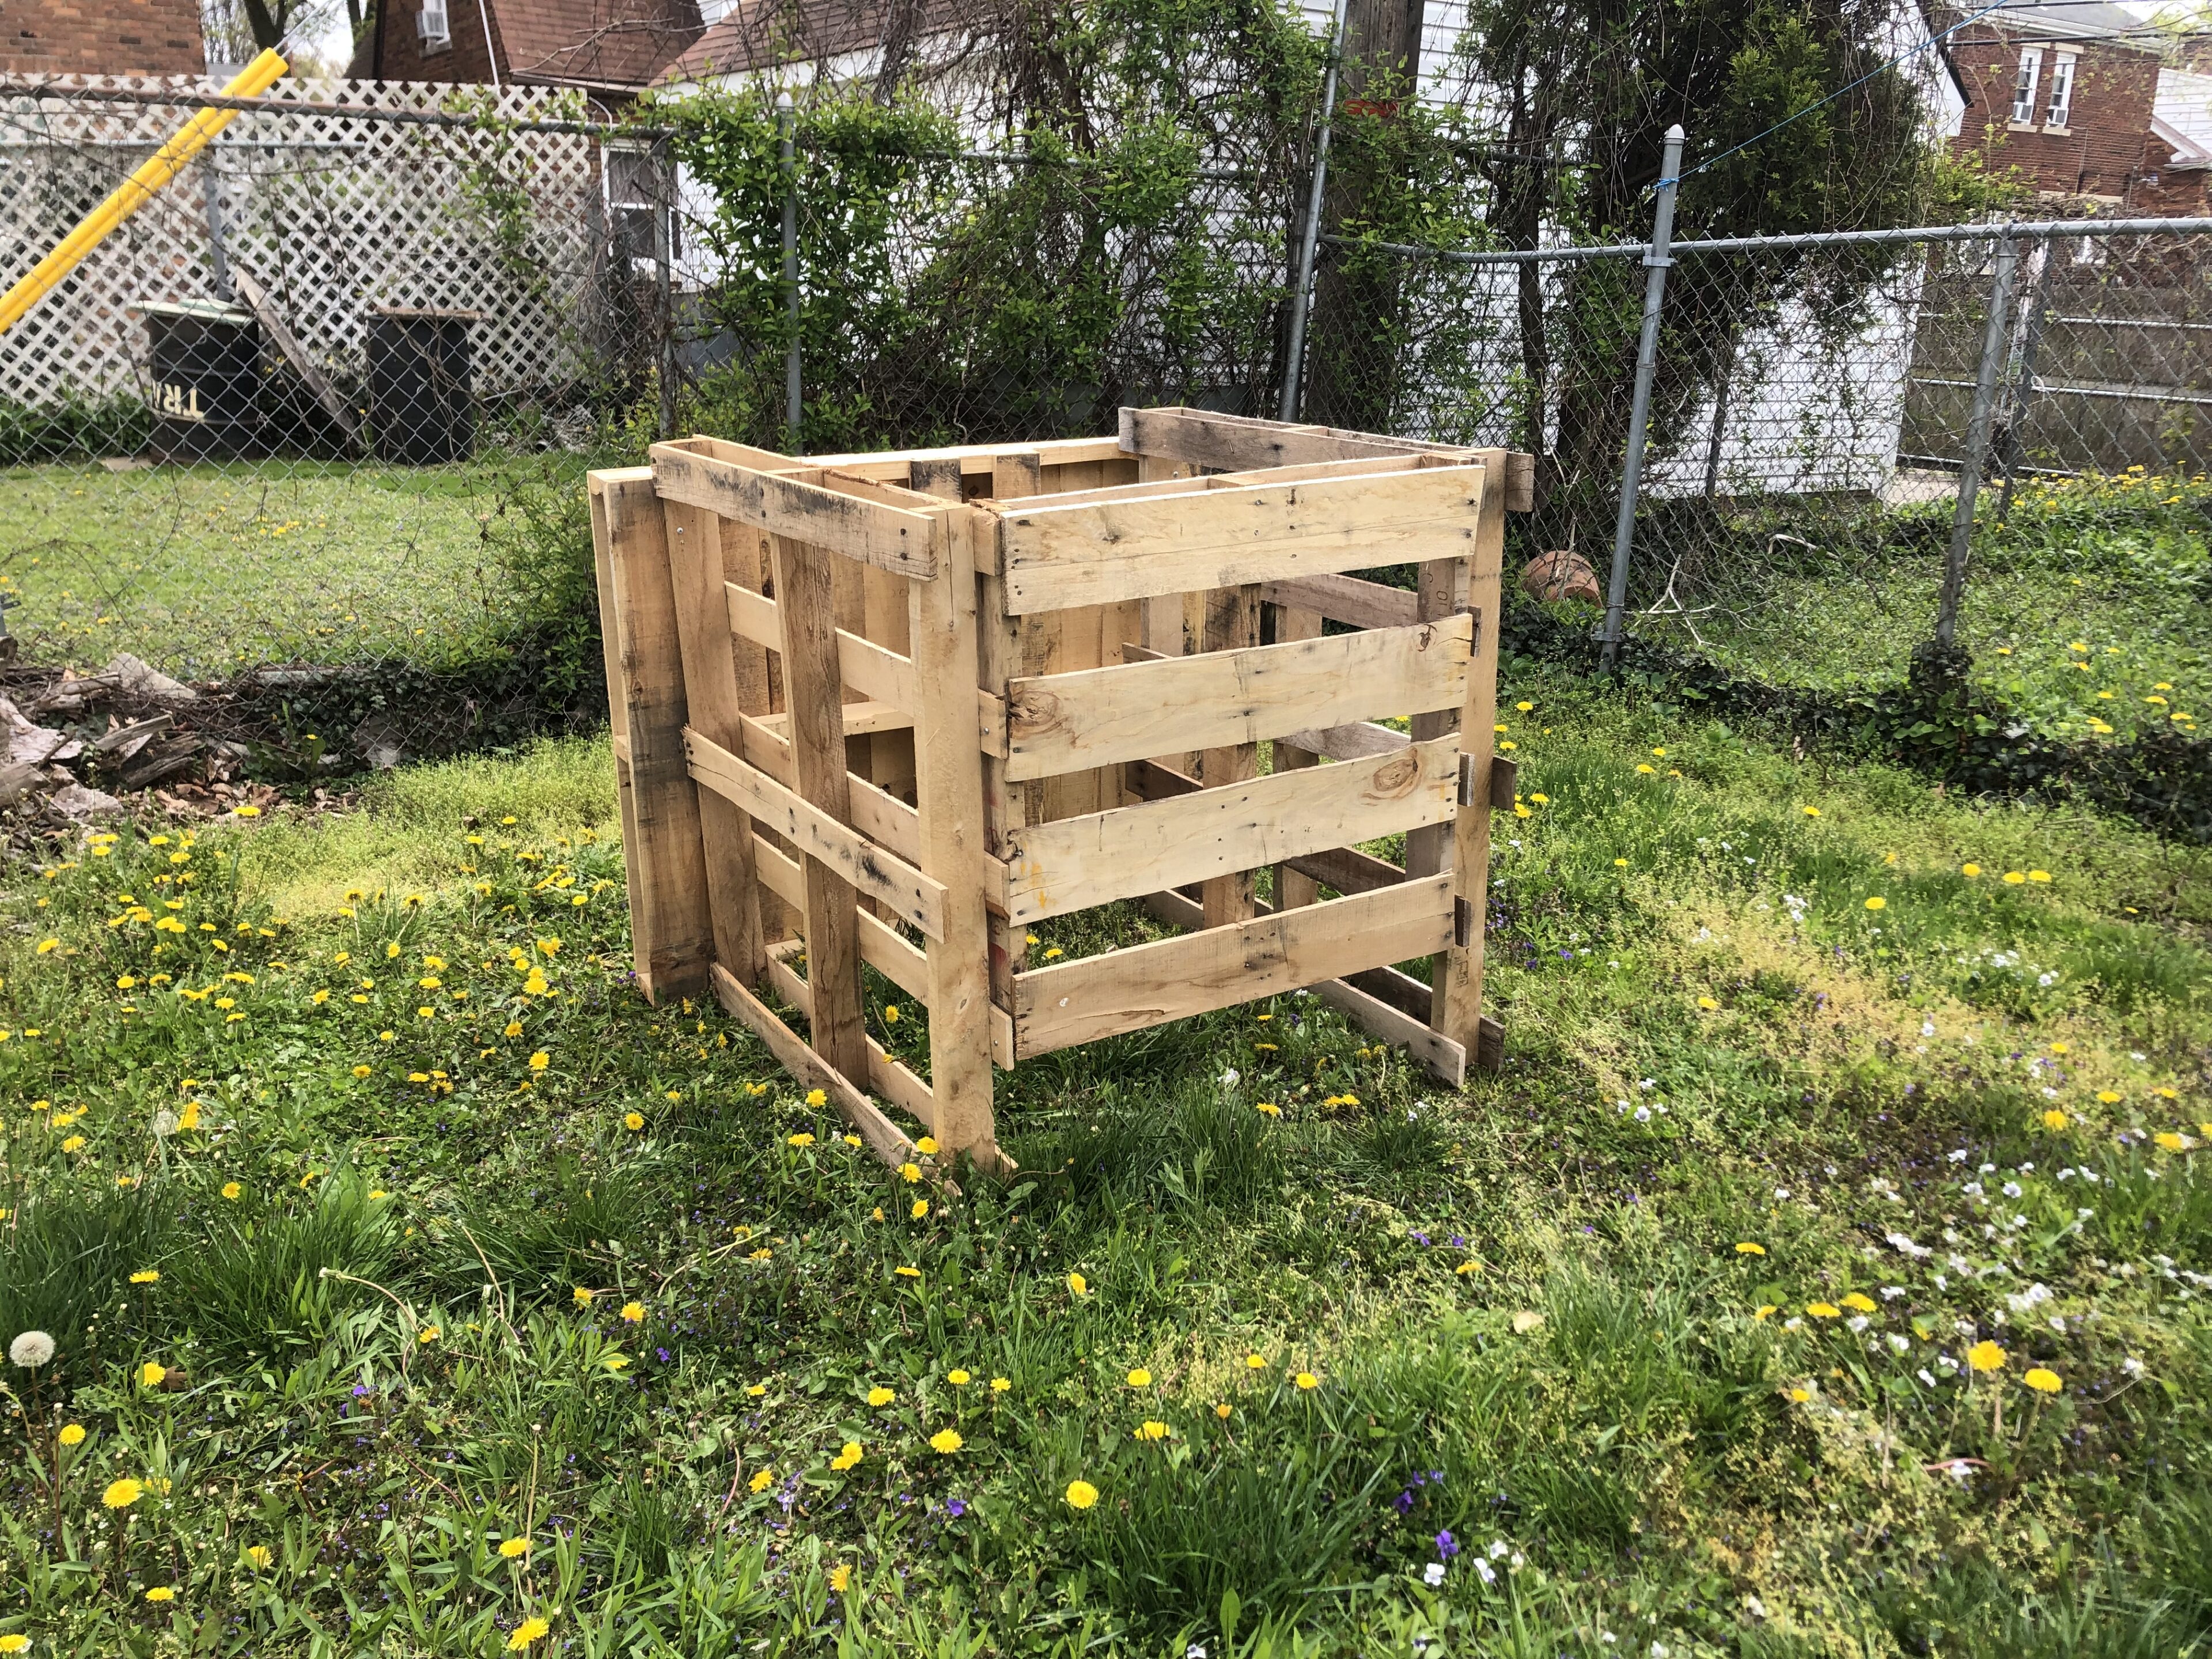 Compost bin built from old pallets